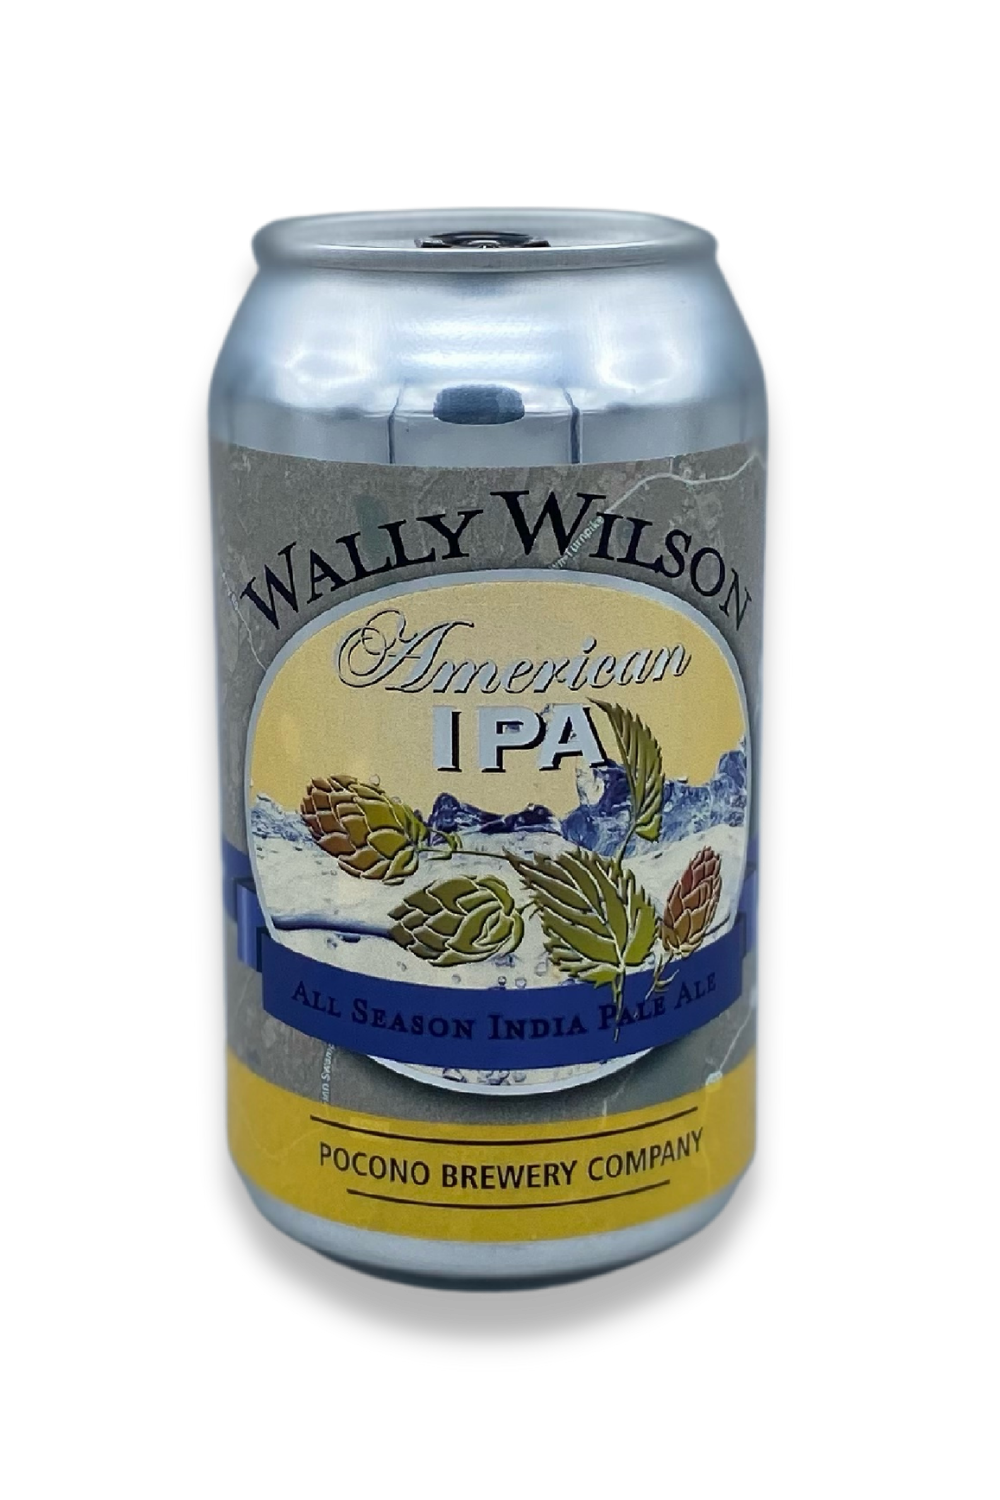 Wally Wilson India Pale Ale